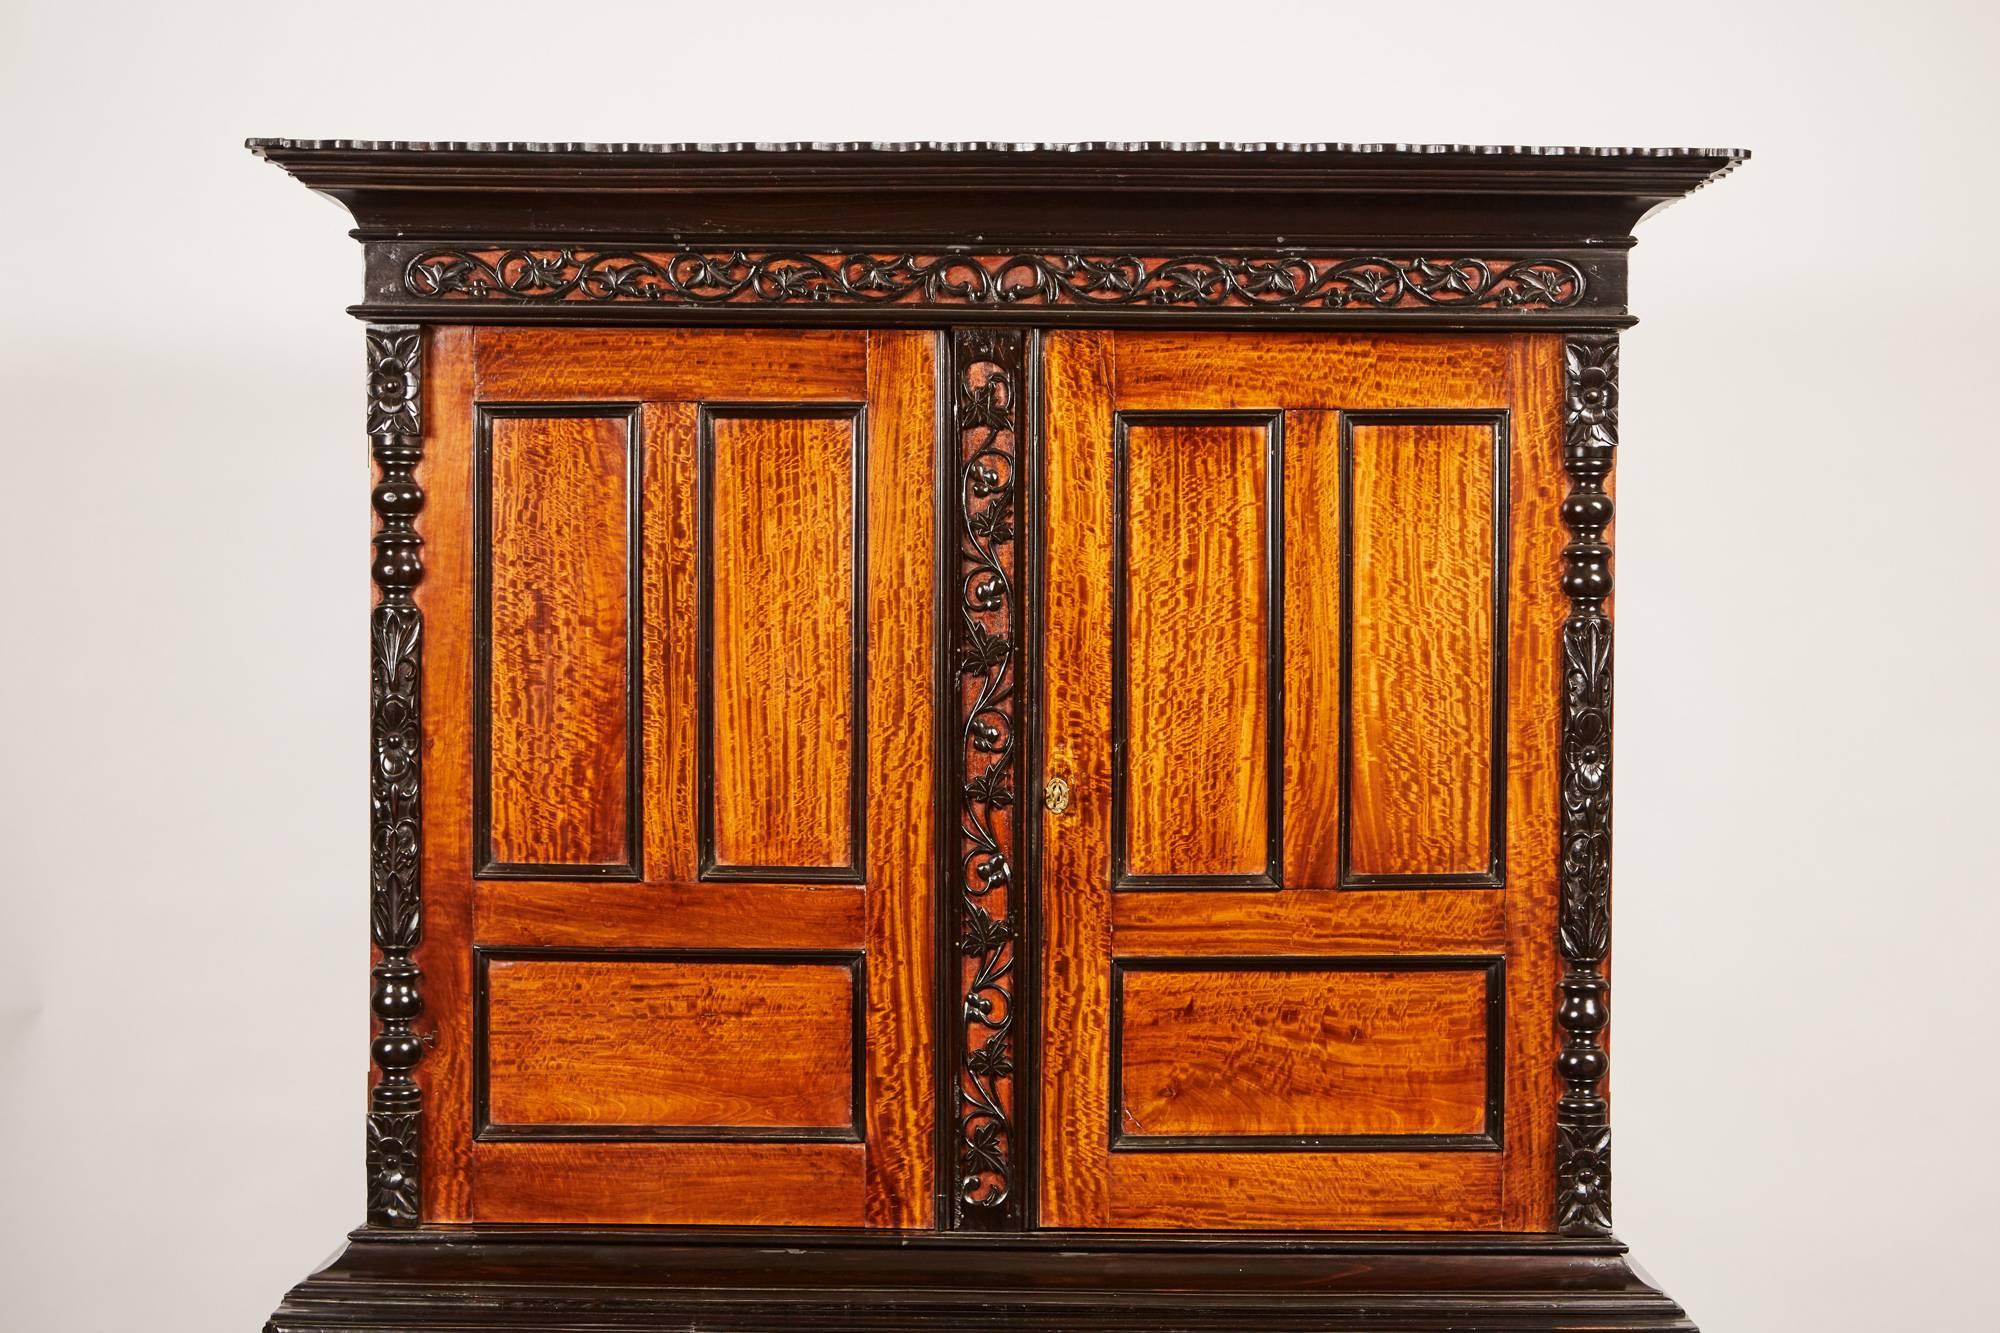 An exquisite 19th century British Colonial four-door cabinet in solid satinwood ebony and features remarkably beautiful carved molding designs of foliage throughout the exterior. The cabinet consists of an upper portion with two cupboard doors